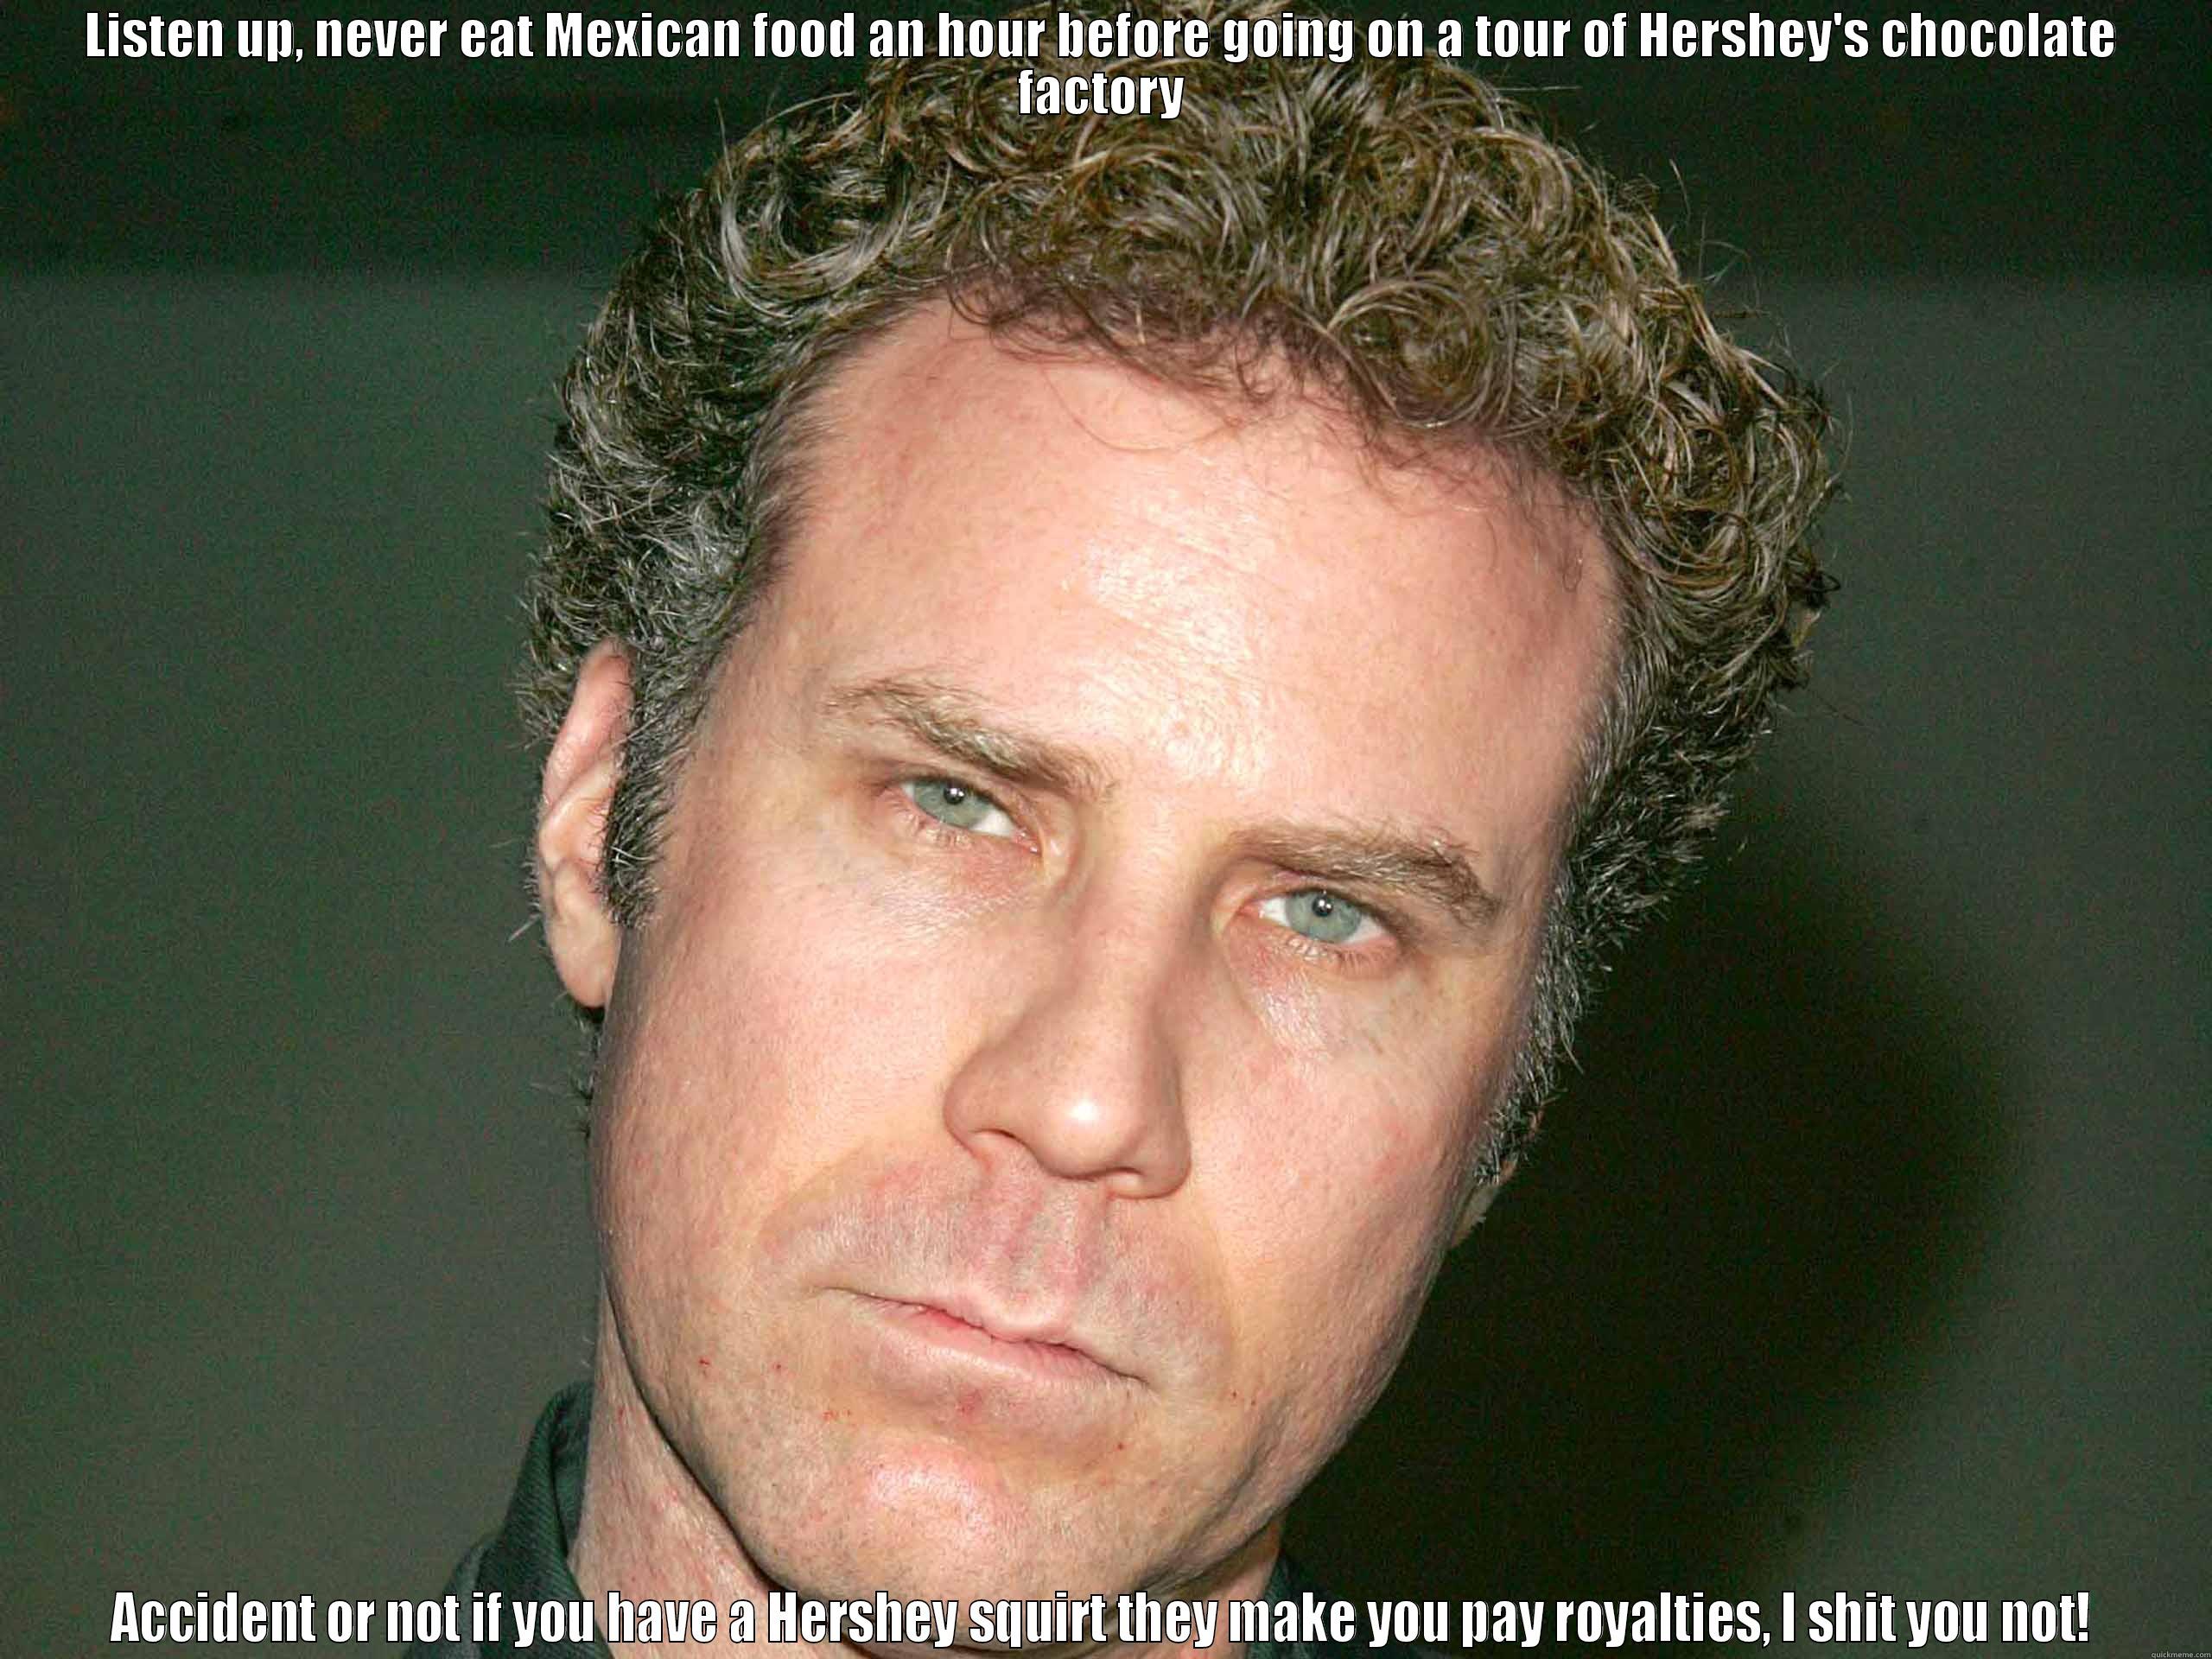 LISTEN UP, NEVER EAT MEXICAN FOOD AN HOUR BEFORE GOING ON A TOUR OF HERSHEY'S CHOCOLATE FACTORY ACCIDENT OR NOT IF YOU HAVE A HERSHEY SQUIRT THEY MAKE YOU PAY ROYALTIES, I SHIT YOU NOT! Misc